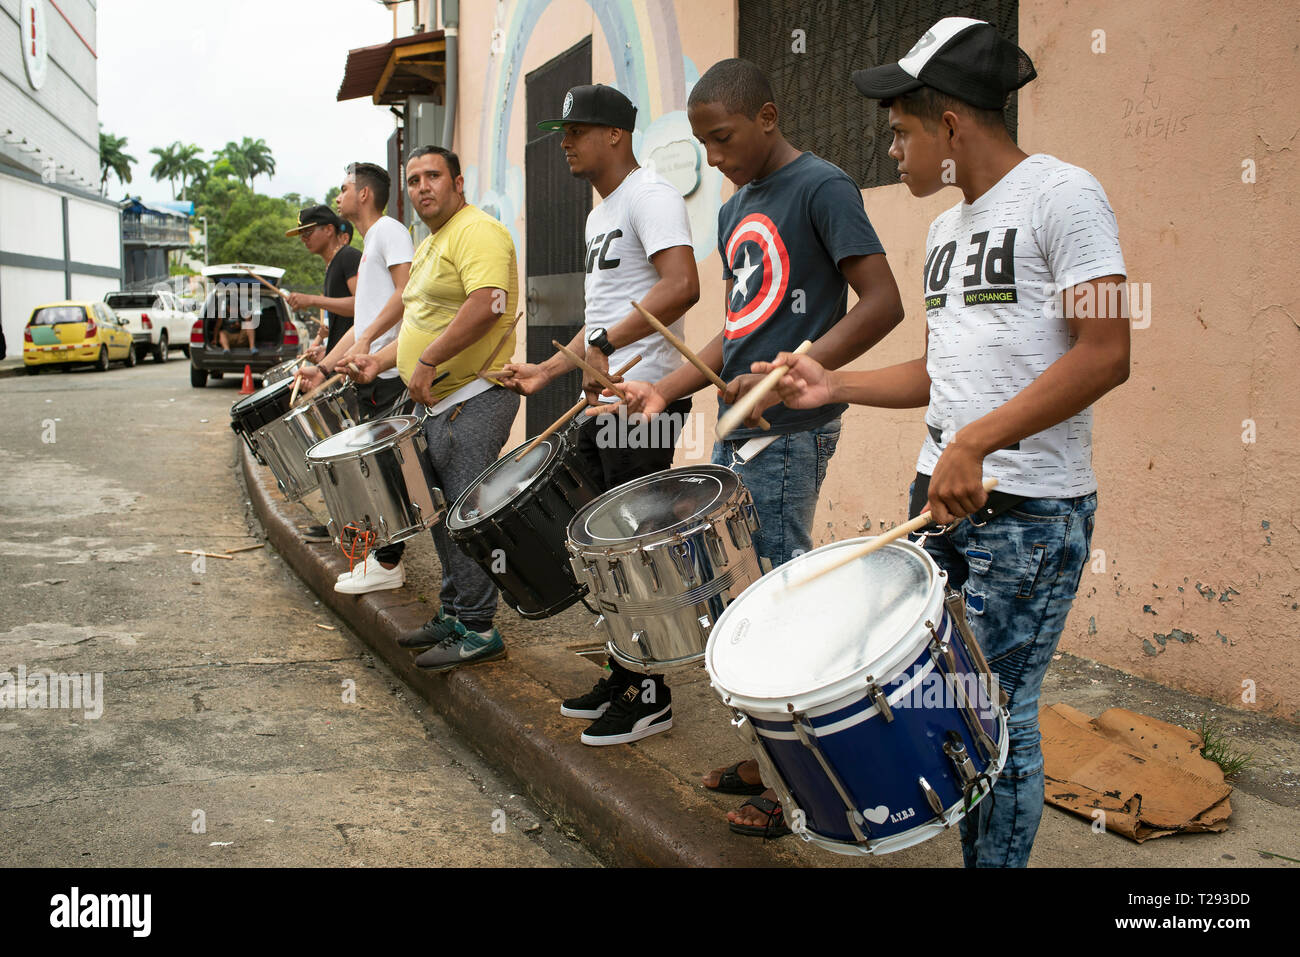 Young musicians rehearsing in public with surdos (marching snare drum) on Sunday afternoon in downtown Panama City. Panama, Central America. Oct 2018 Stock Photo